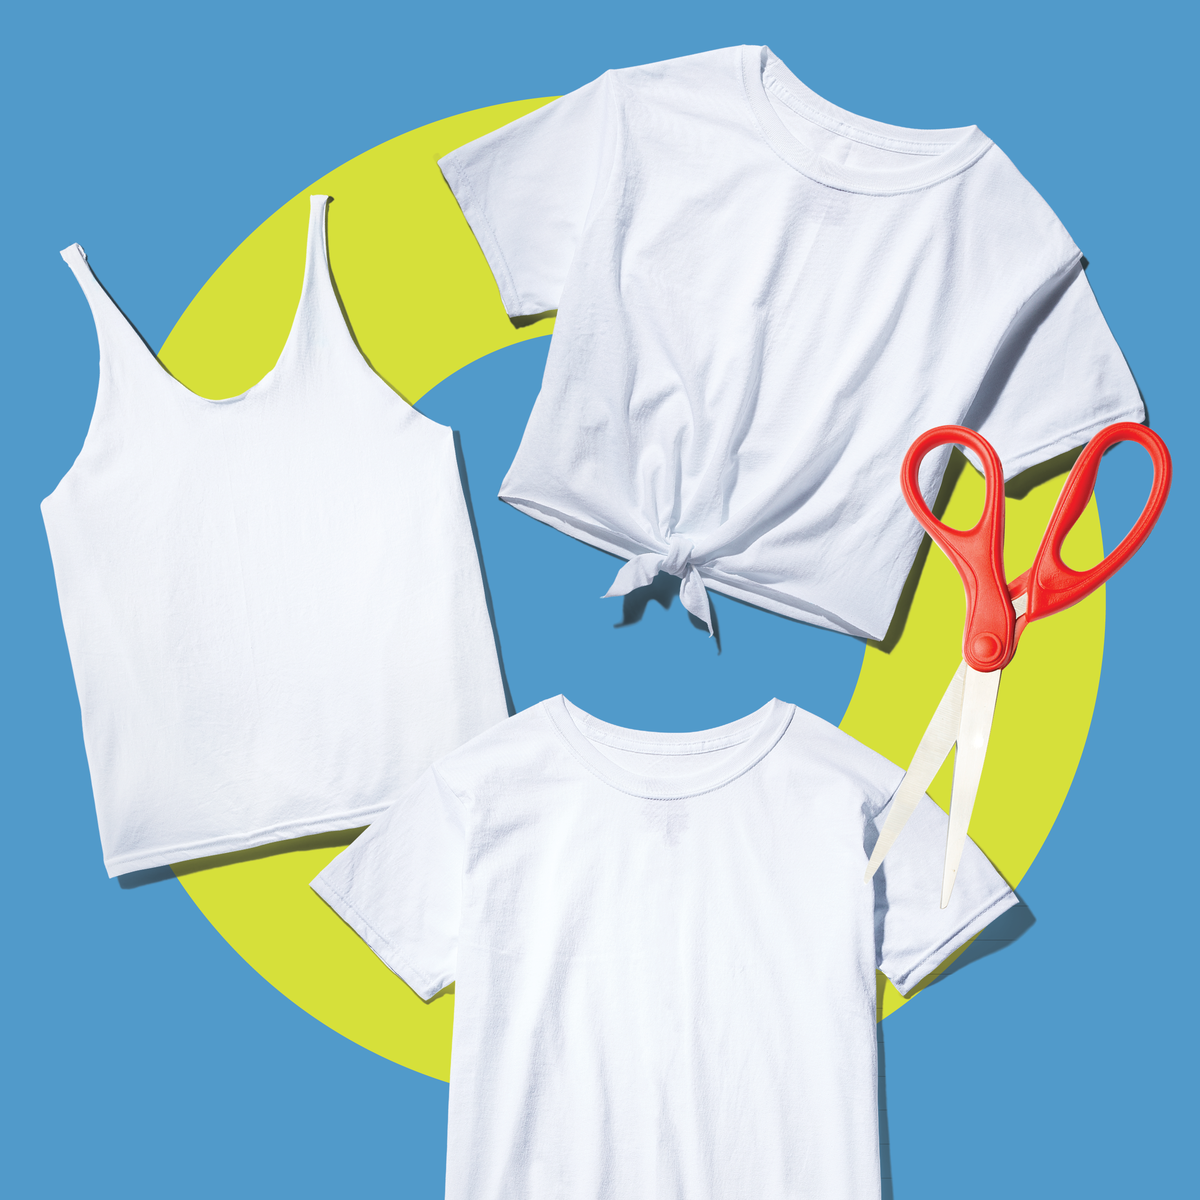 To Cut A Into A Workout Top – 5 Ways To Cut Tees